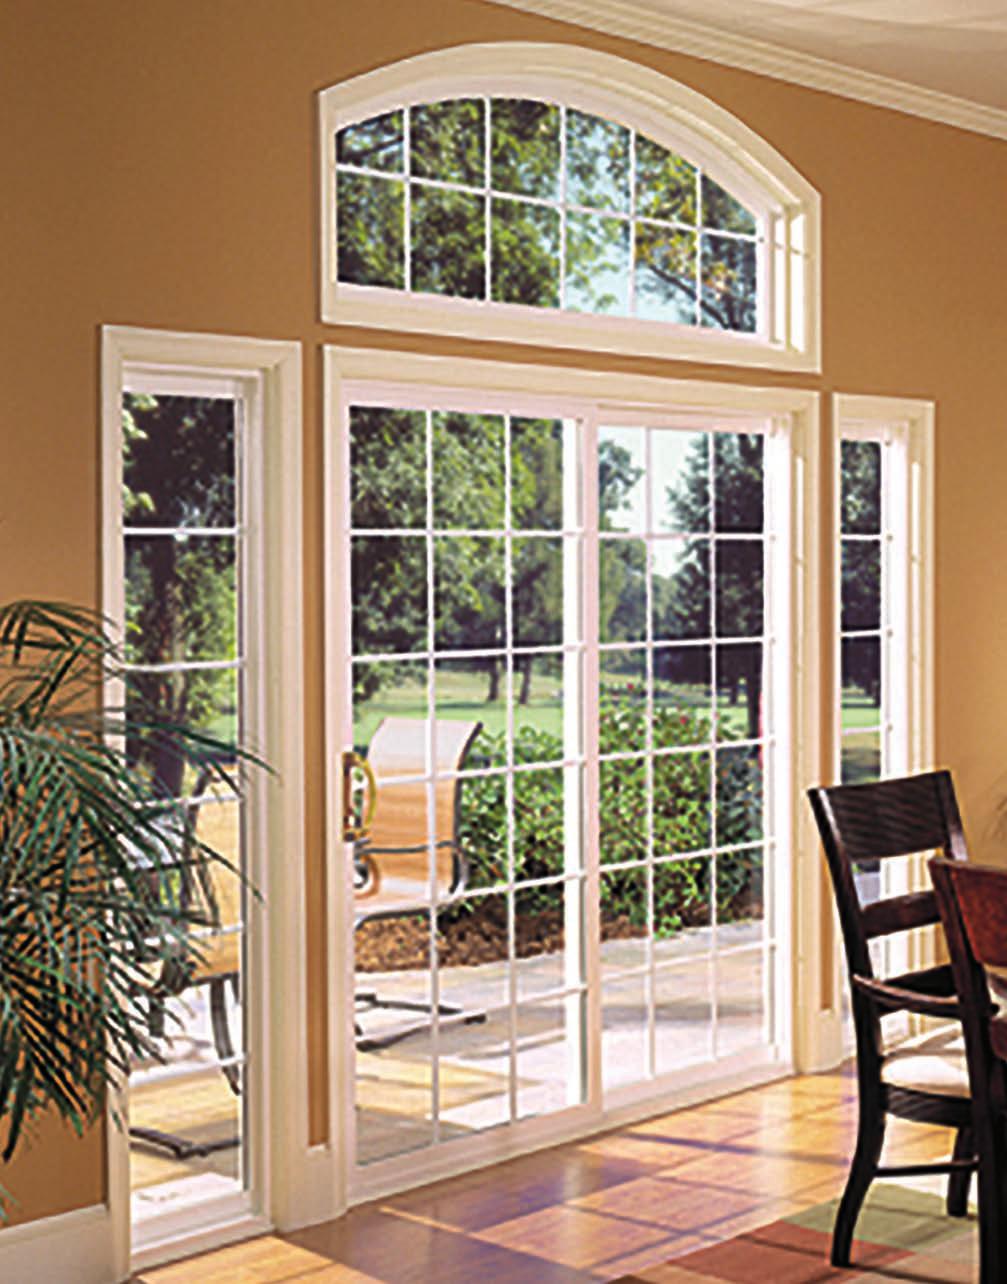 BRAND SUMMARY Vinyl Sliding Patio Doors manufactured by Pella Corporation feature an extruded, rigid PVC (polyvinyl chloride) frame and sash with heat-fused mitered corners for a fully welded corner